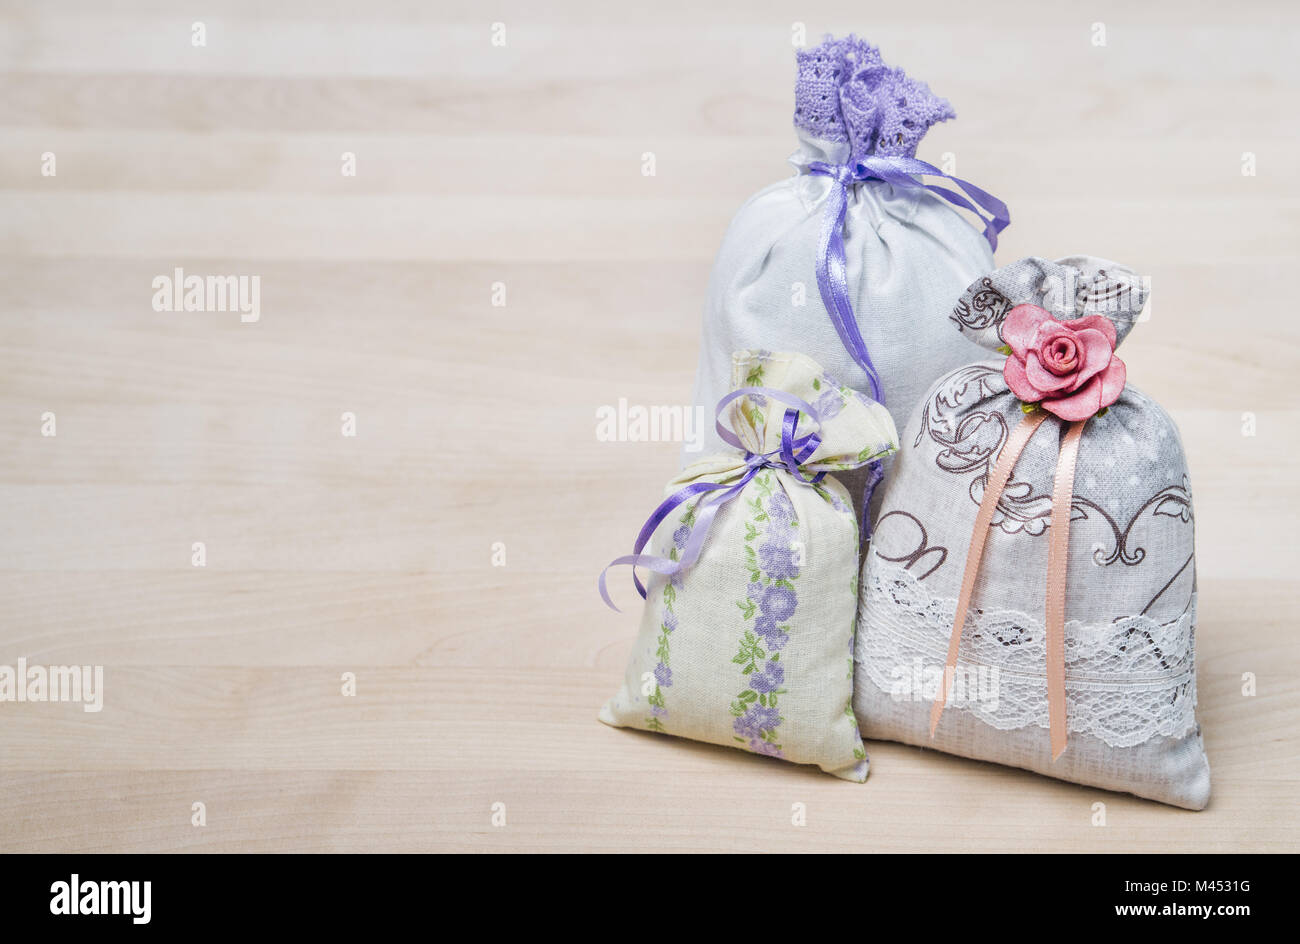 Three lavender scent pouches on wooden board or table. Scented sachets on wood with copy space. Fragrance bags for fresh home. Decoration. Stock Photo